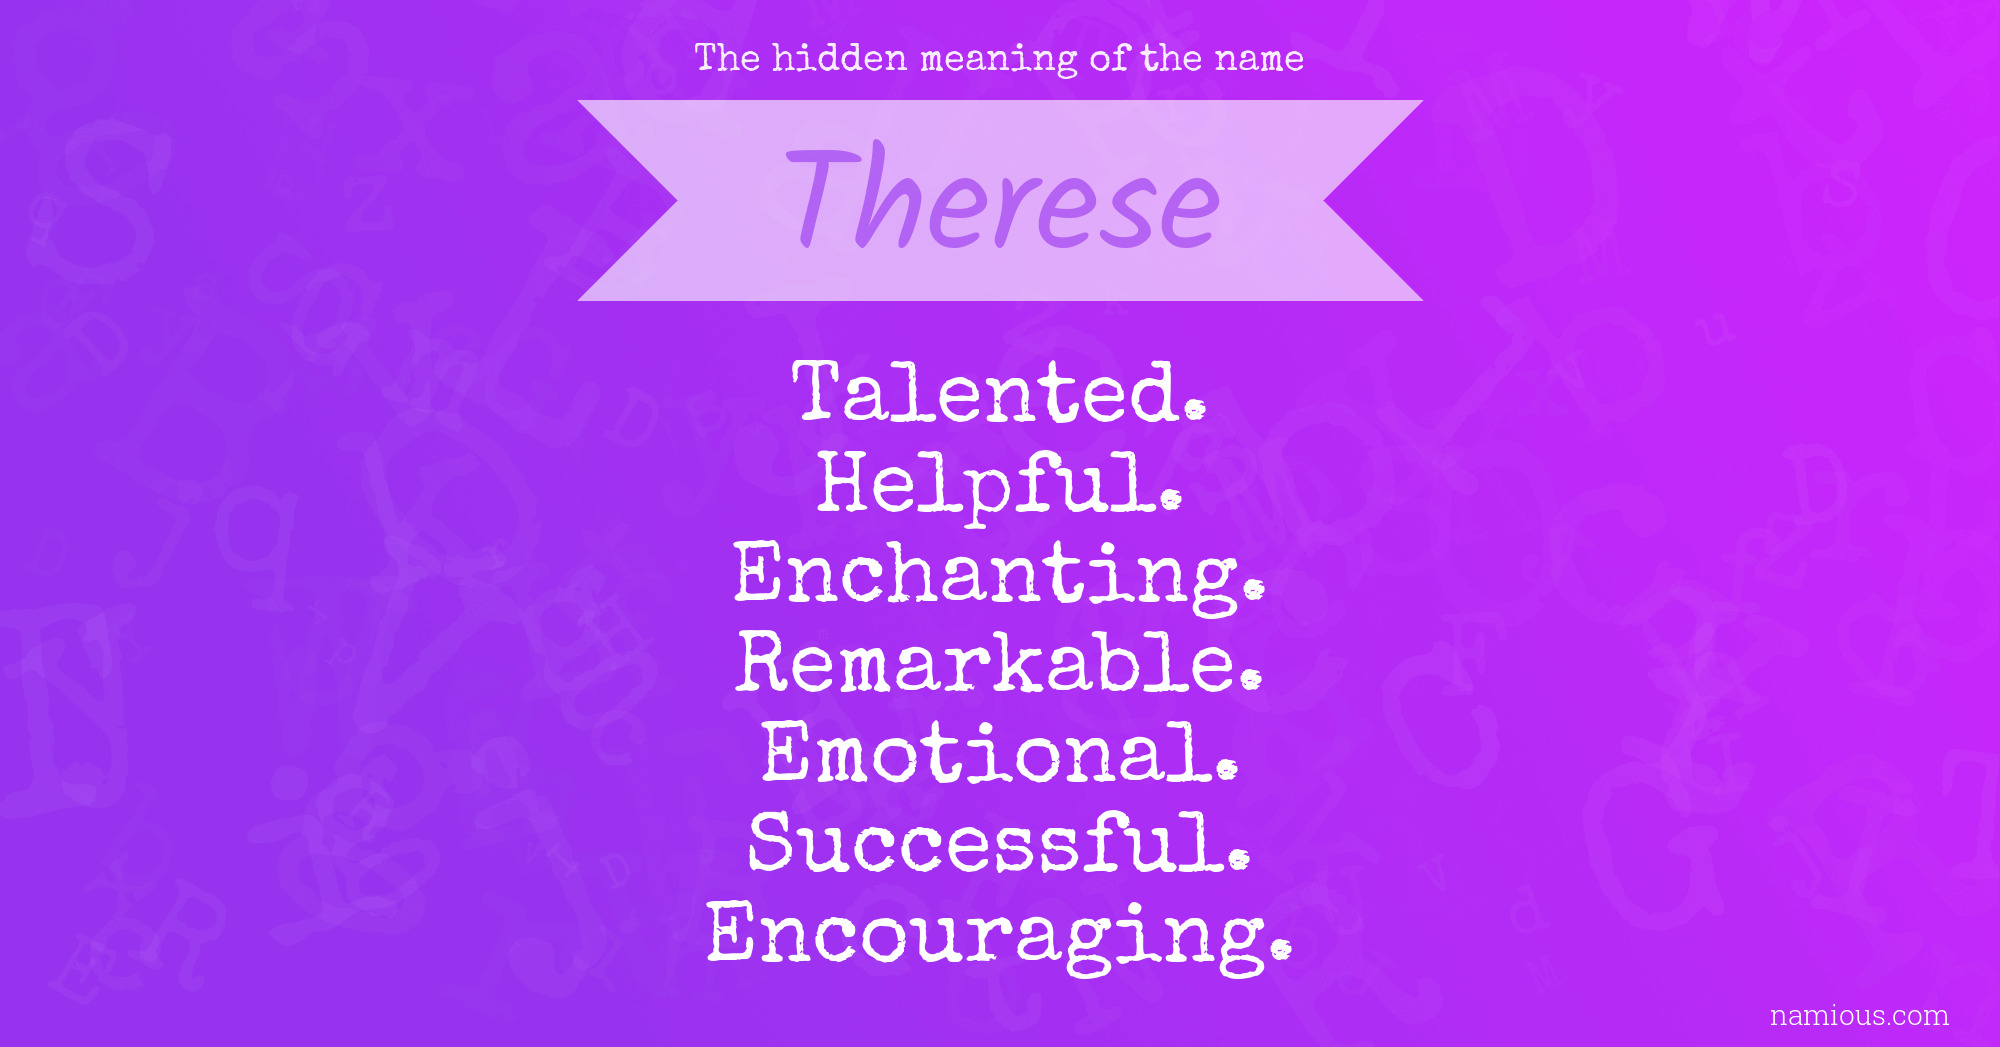 The hidden meaning of the name Therese